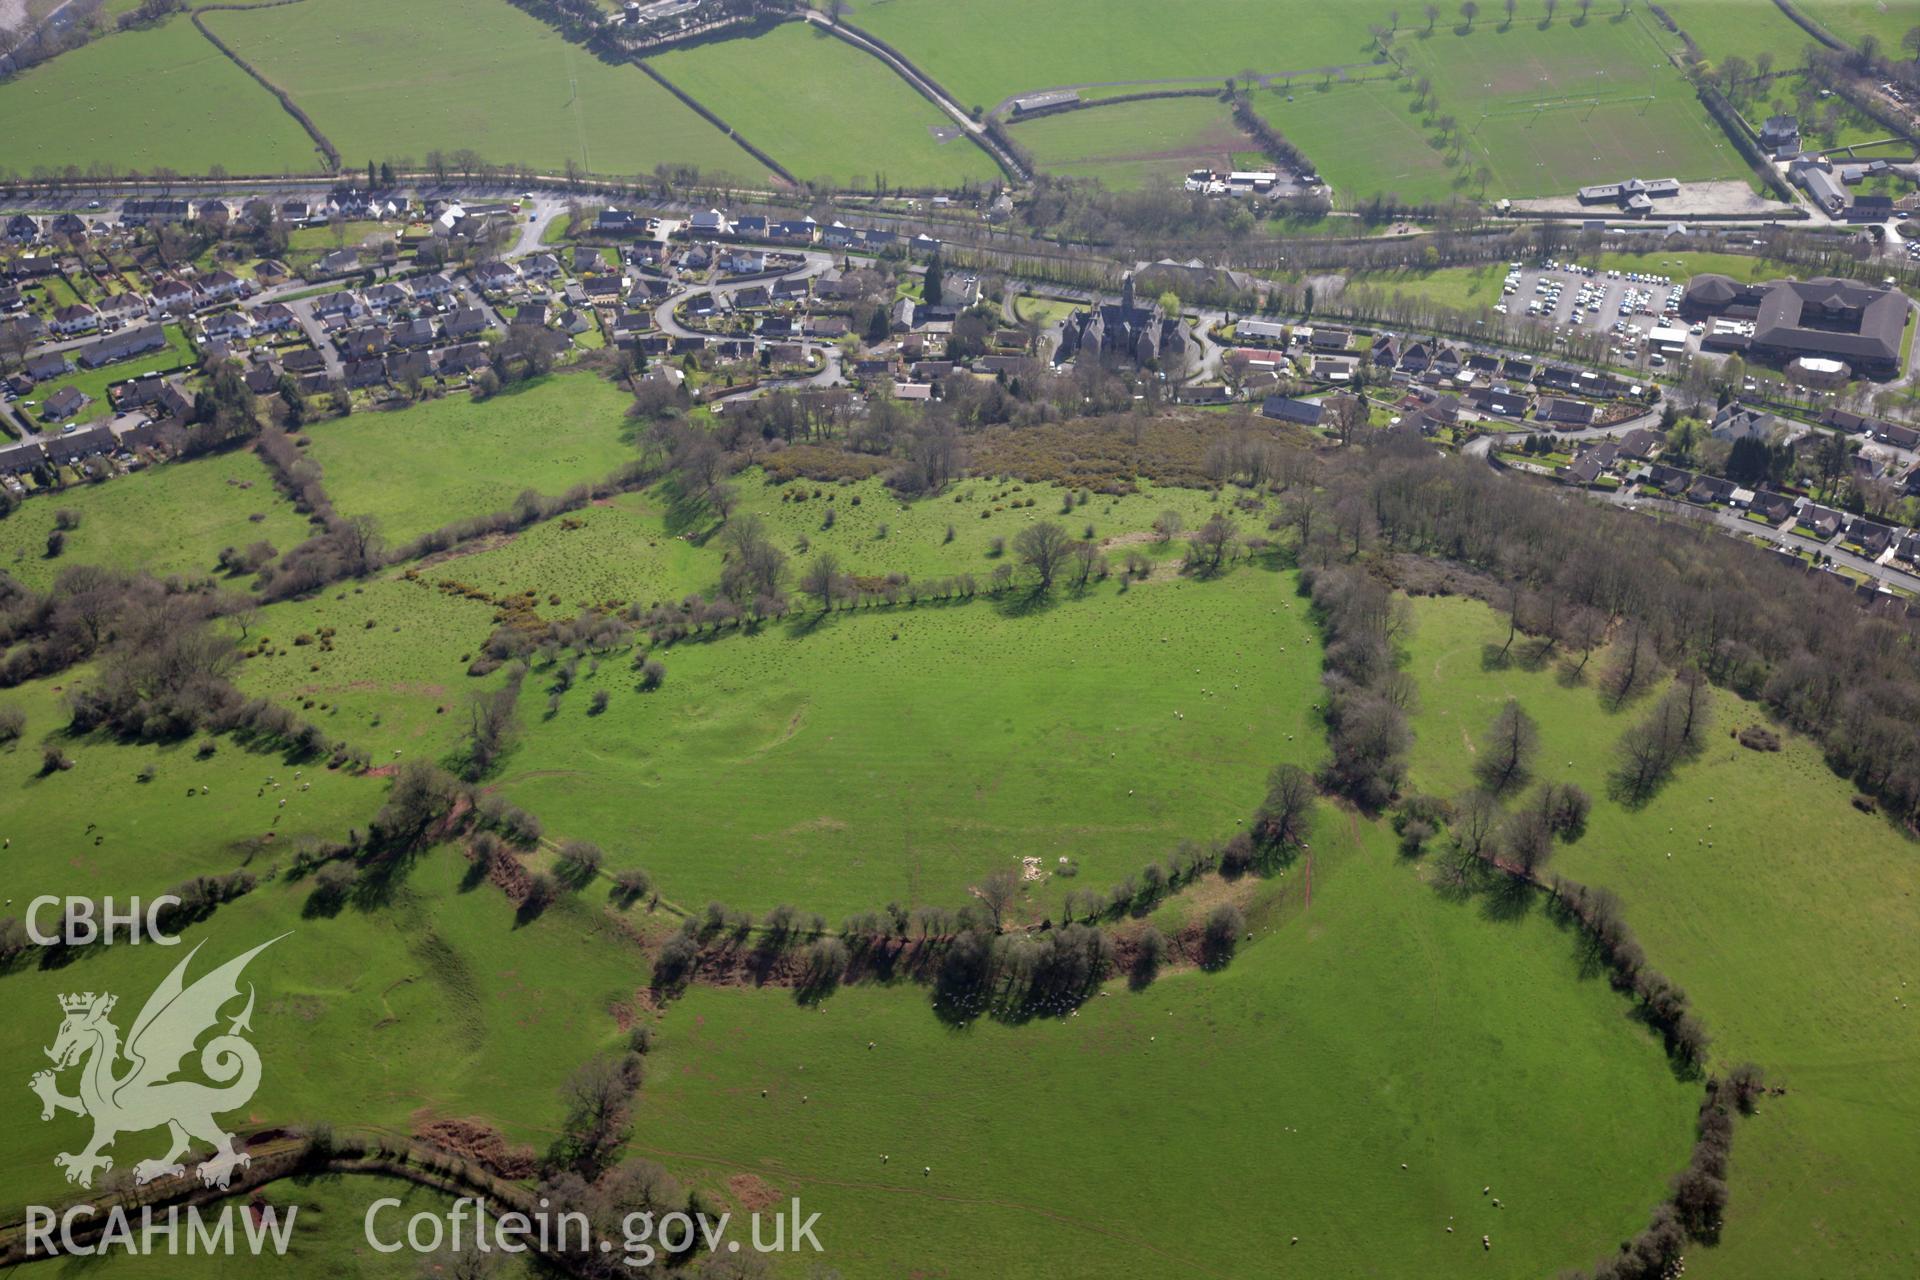 RCAHMW colour oblique photograph of Slwch Tump hillfort. Taken by Toby Driver and Oliver Davies on 28/03/2012.